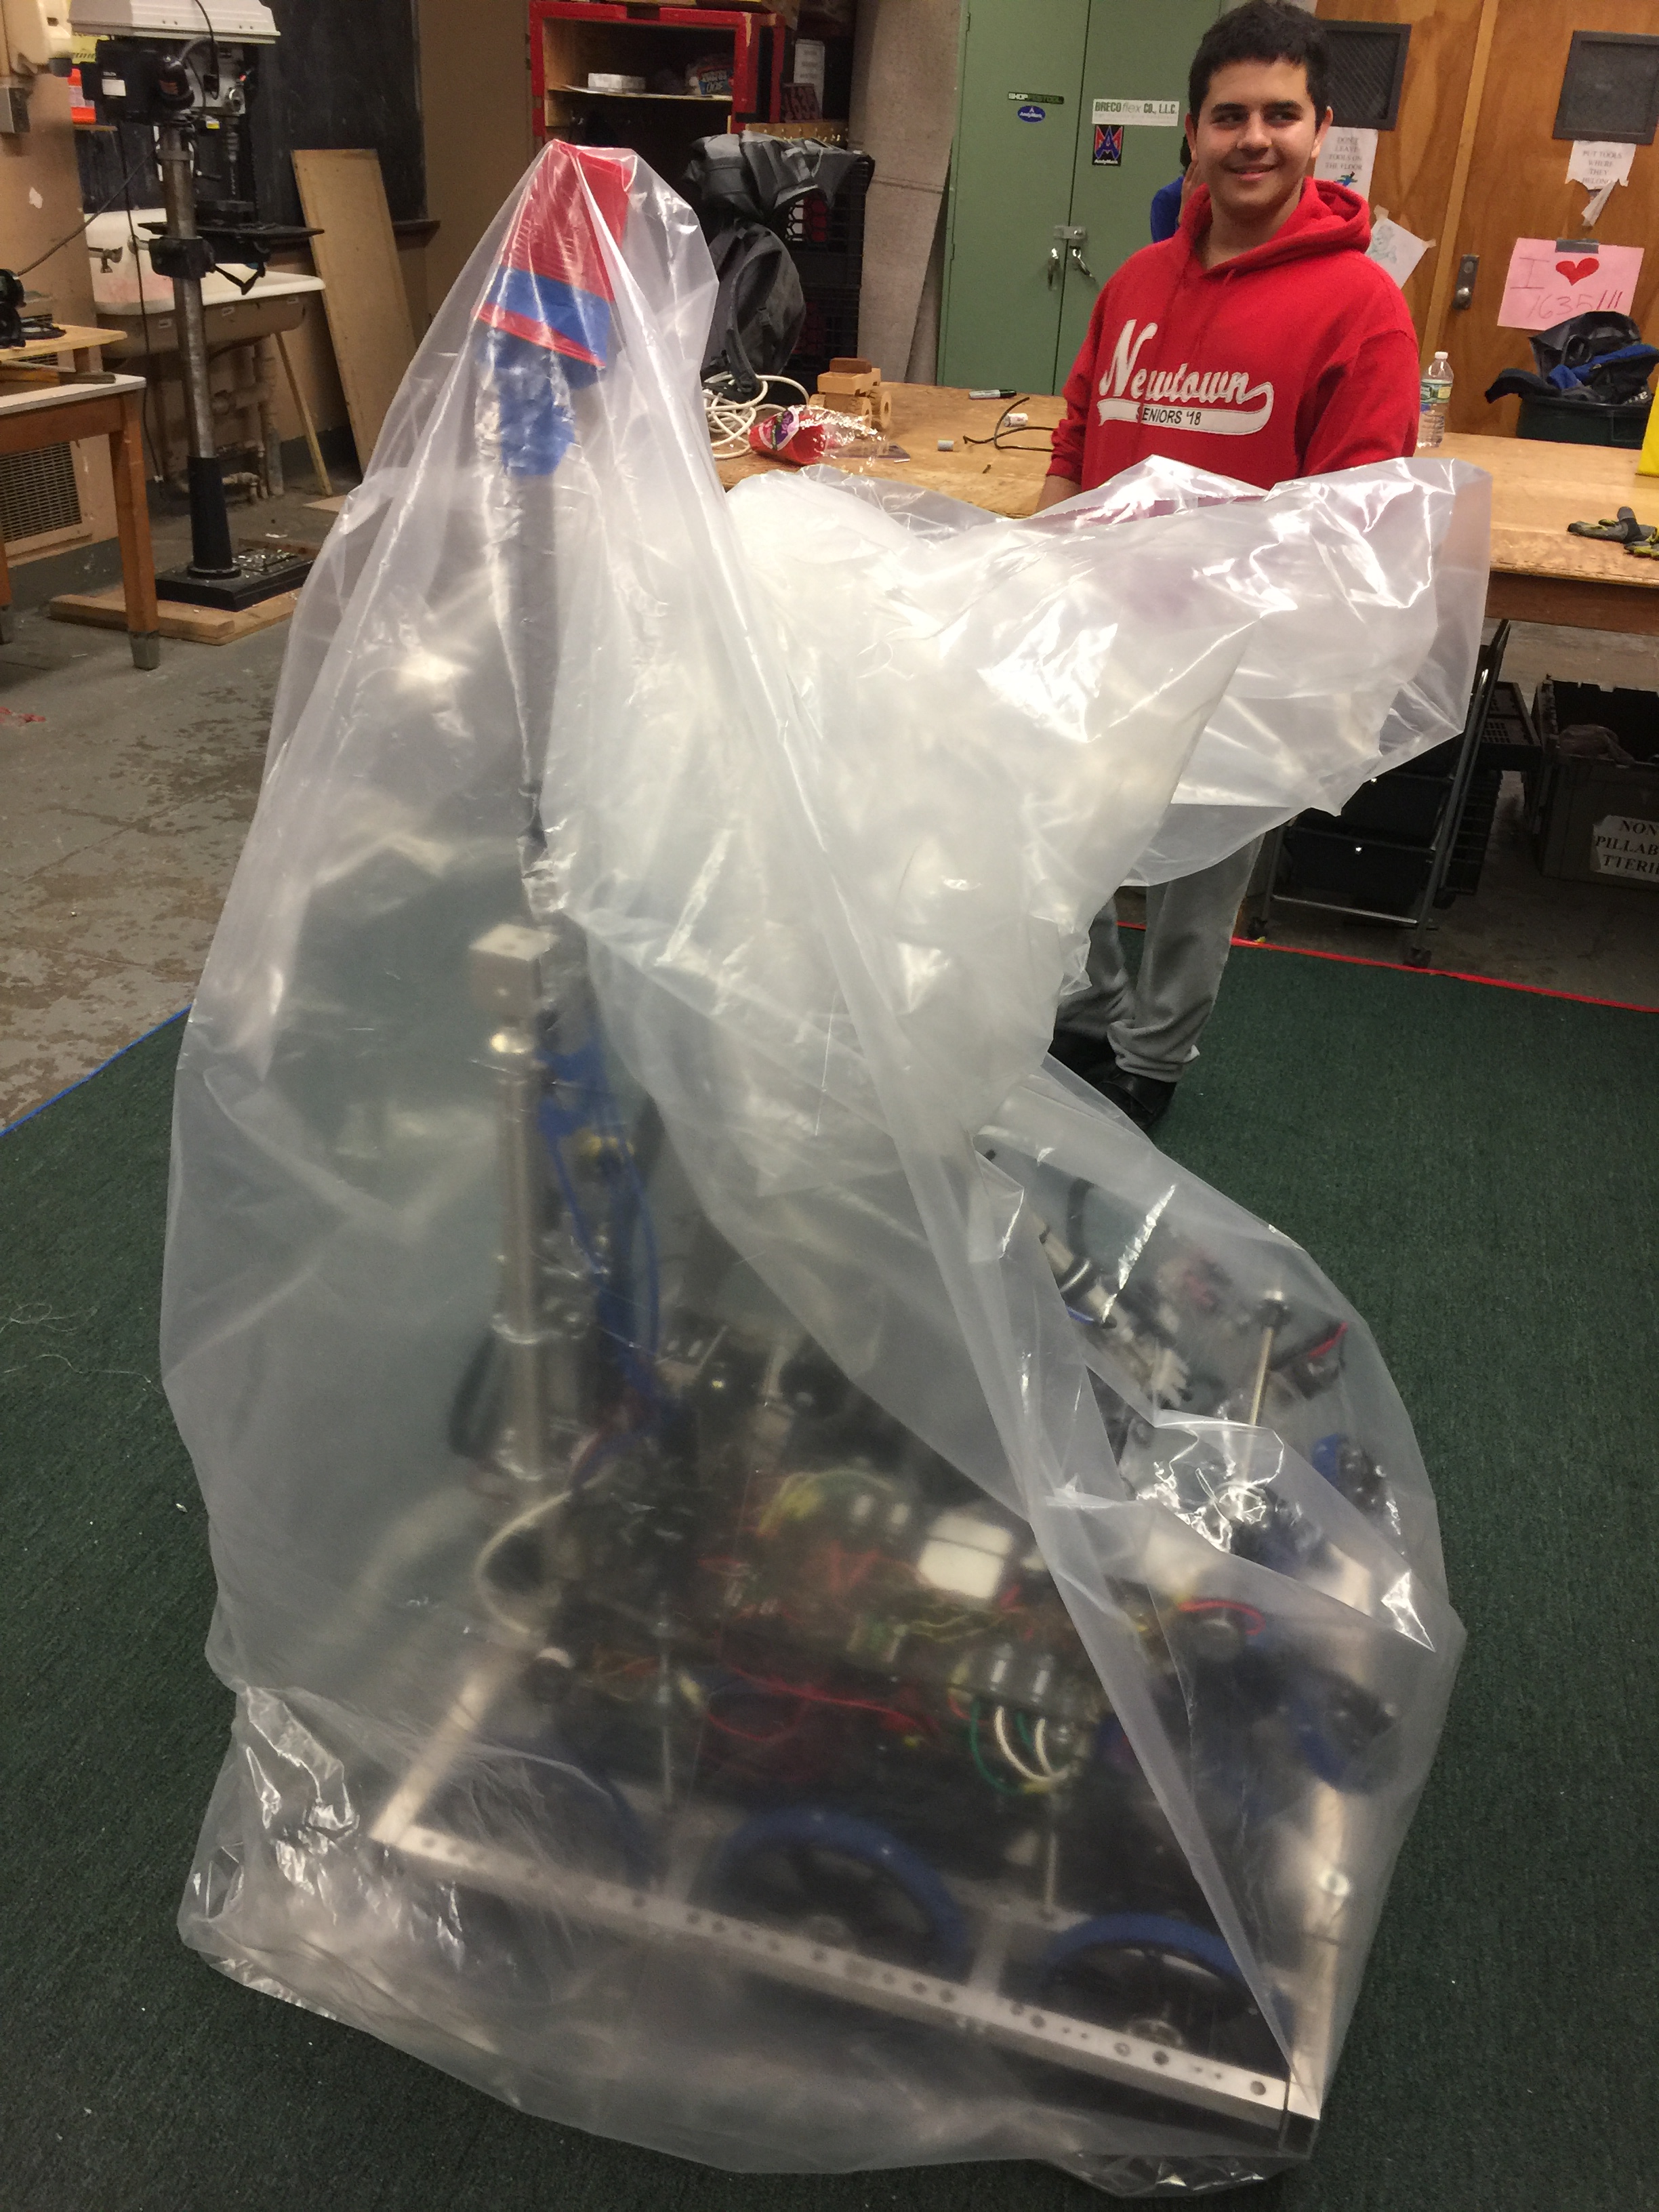 Robot is in the bag